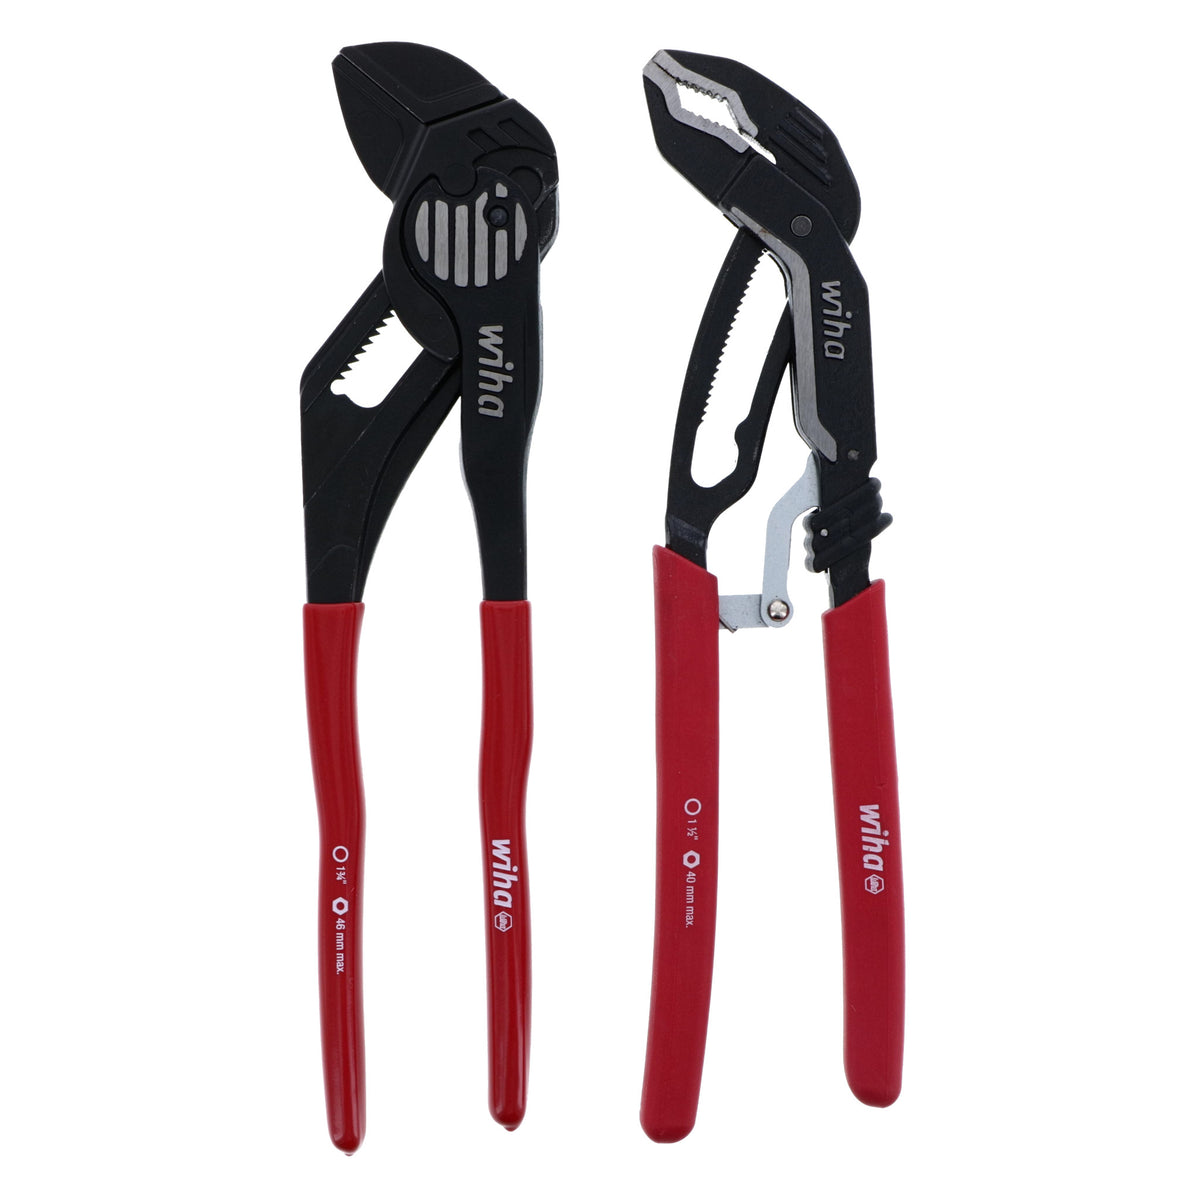 Wiha 32619 2 Piece Classic Grip Pliers Wrench and Auto Pliers Set